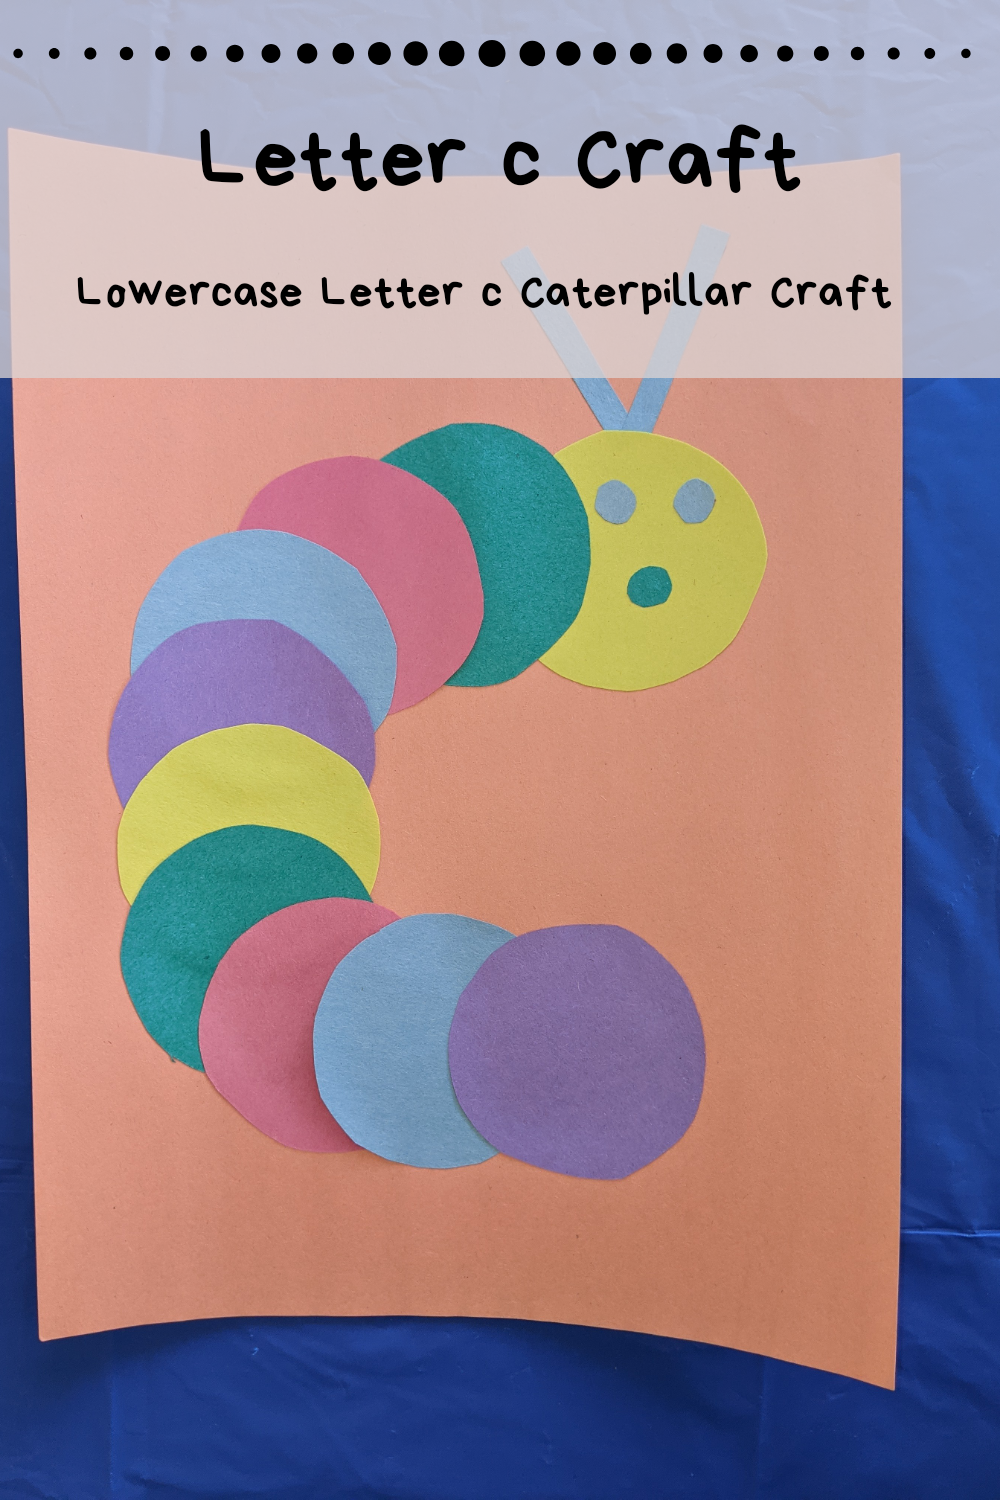 Lowercase Letter C Craft for Kids - Home With Hollie